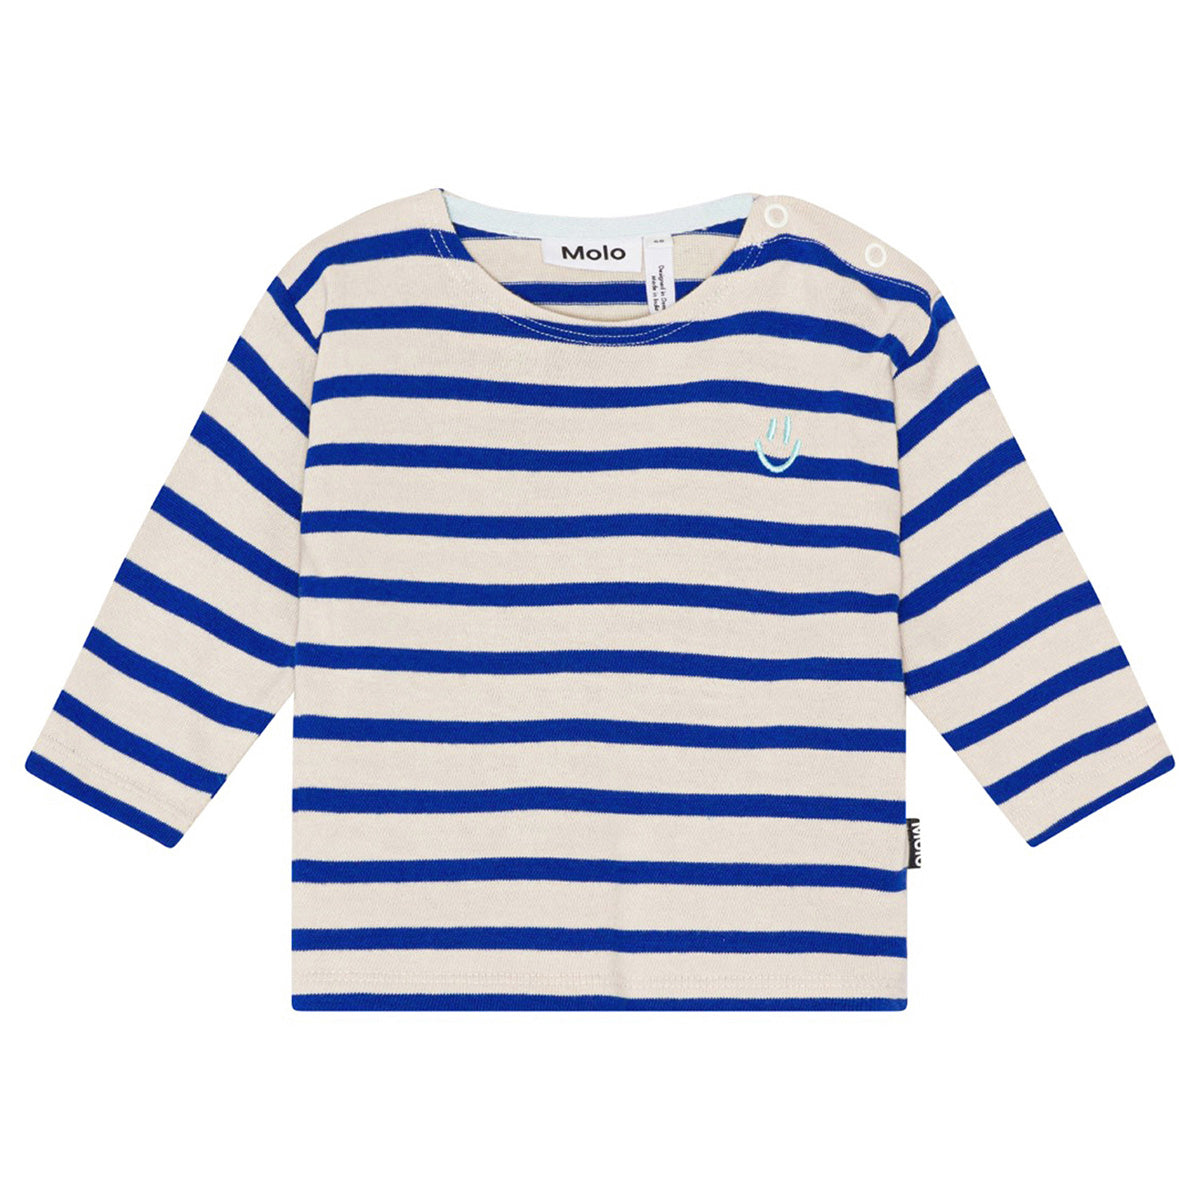 The Edarko Tee from Molo. Long sleeve, striped top for small children in soft, organic cotton.